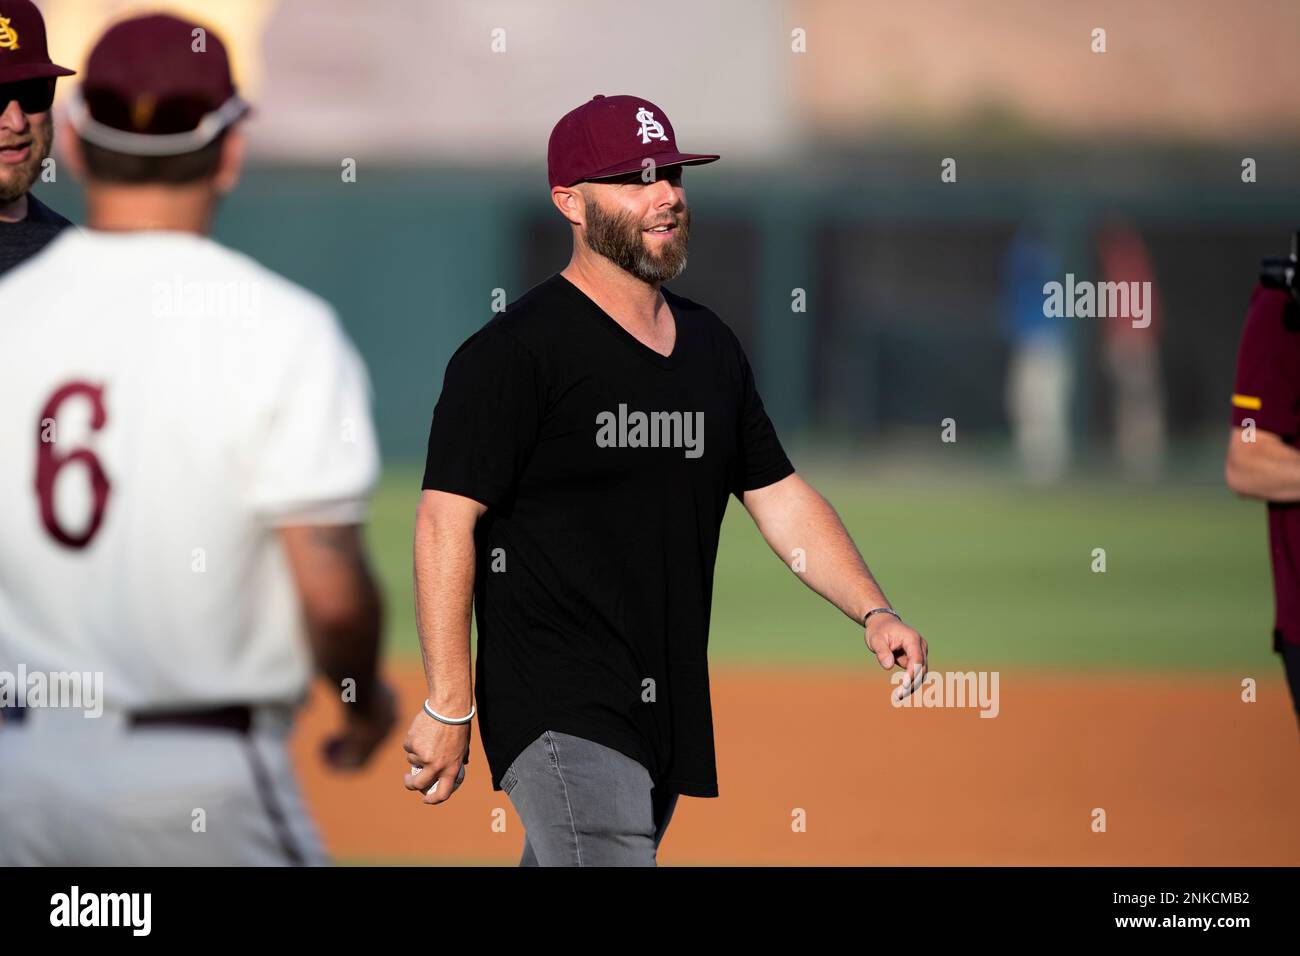 TEMPE, AZ - APRIL 15: Former ASU Sun Devil Dustin Pedroia gets honored  before a baseball game between the Arizona State Sun Devils and University  of Southern California Trojans on April 15